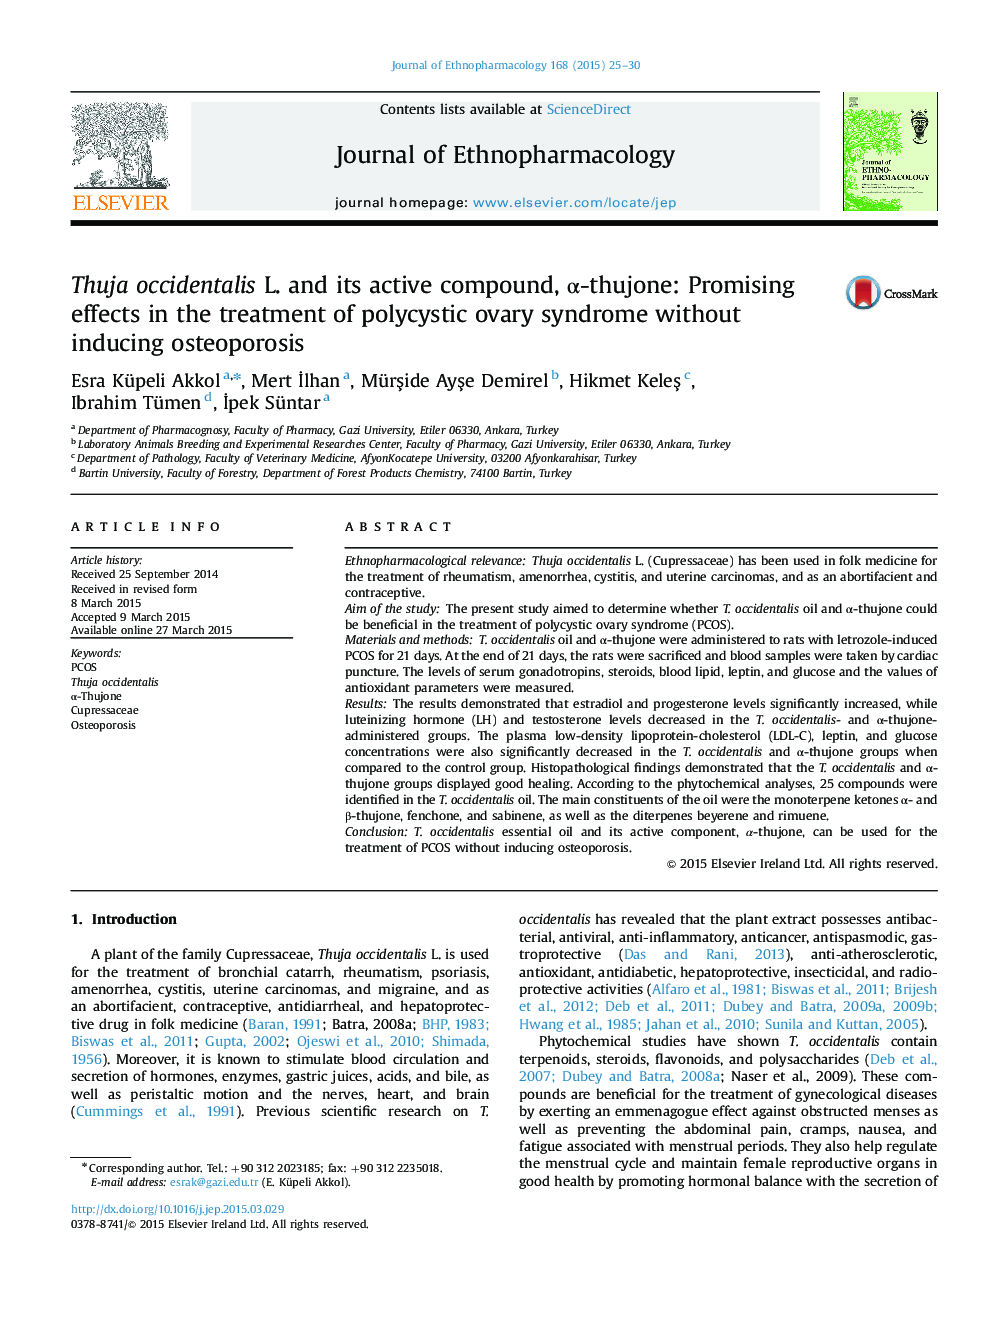 Thuja occidentalis L. and its active compound, Î±-thujone: Promising effects in the treatment of polycystic ovary syndrome without inducing osteoporosis